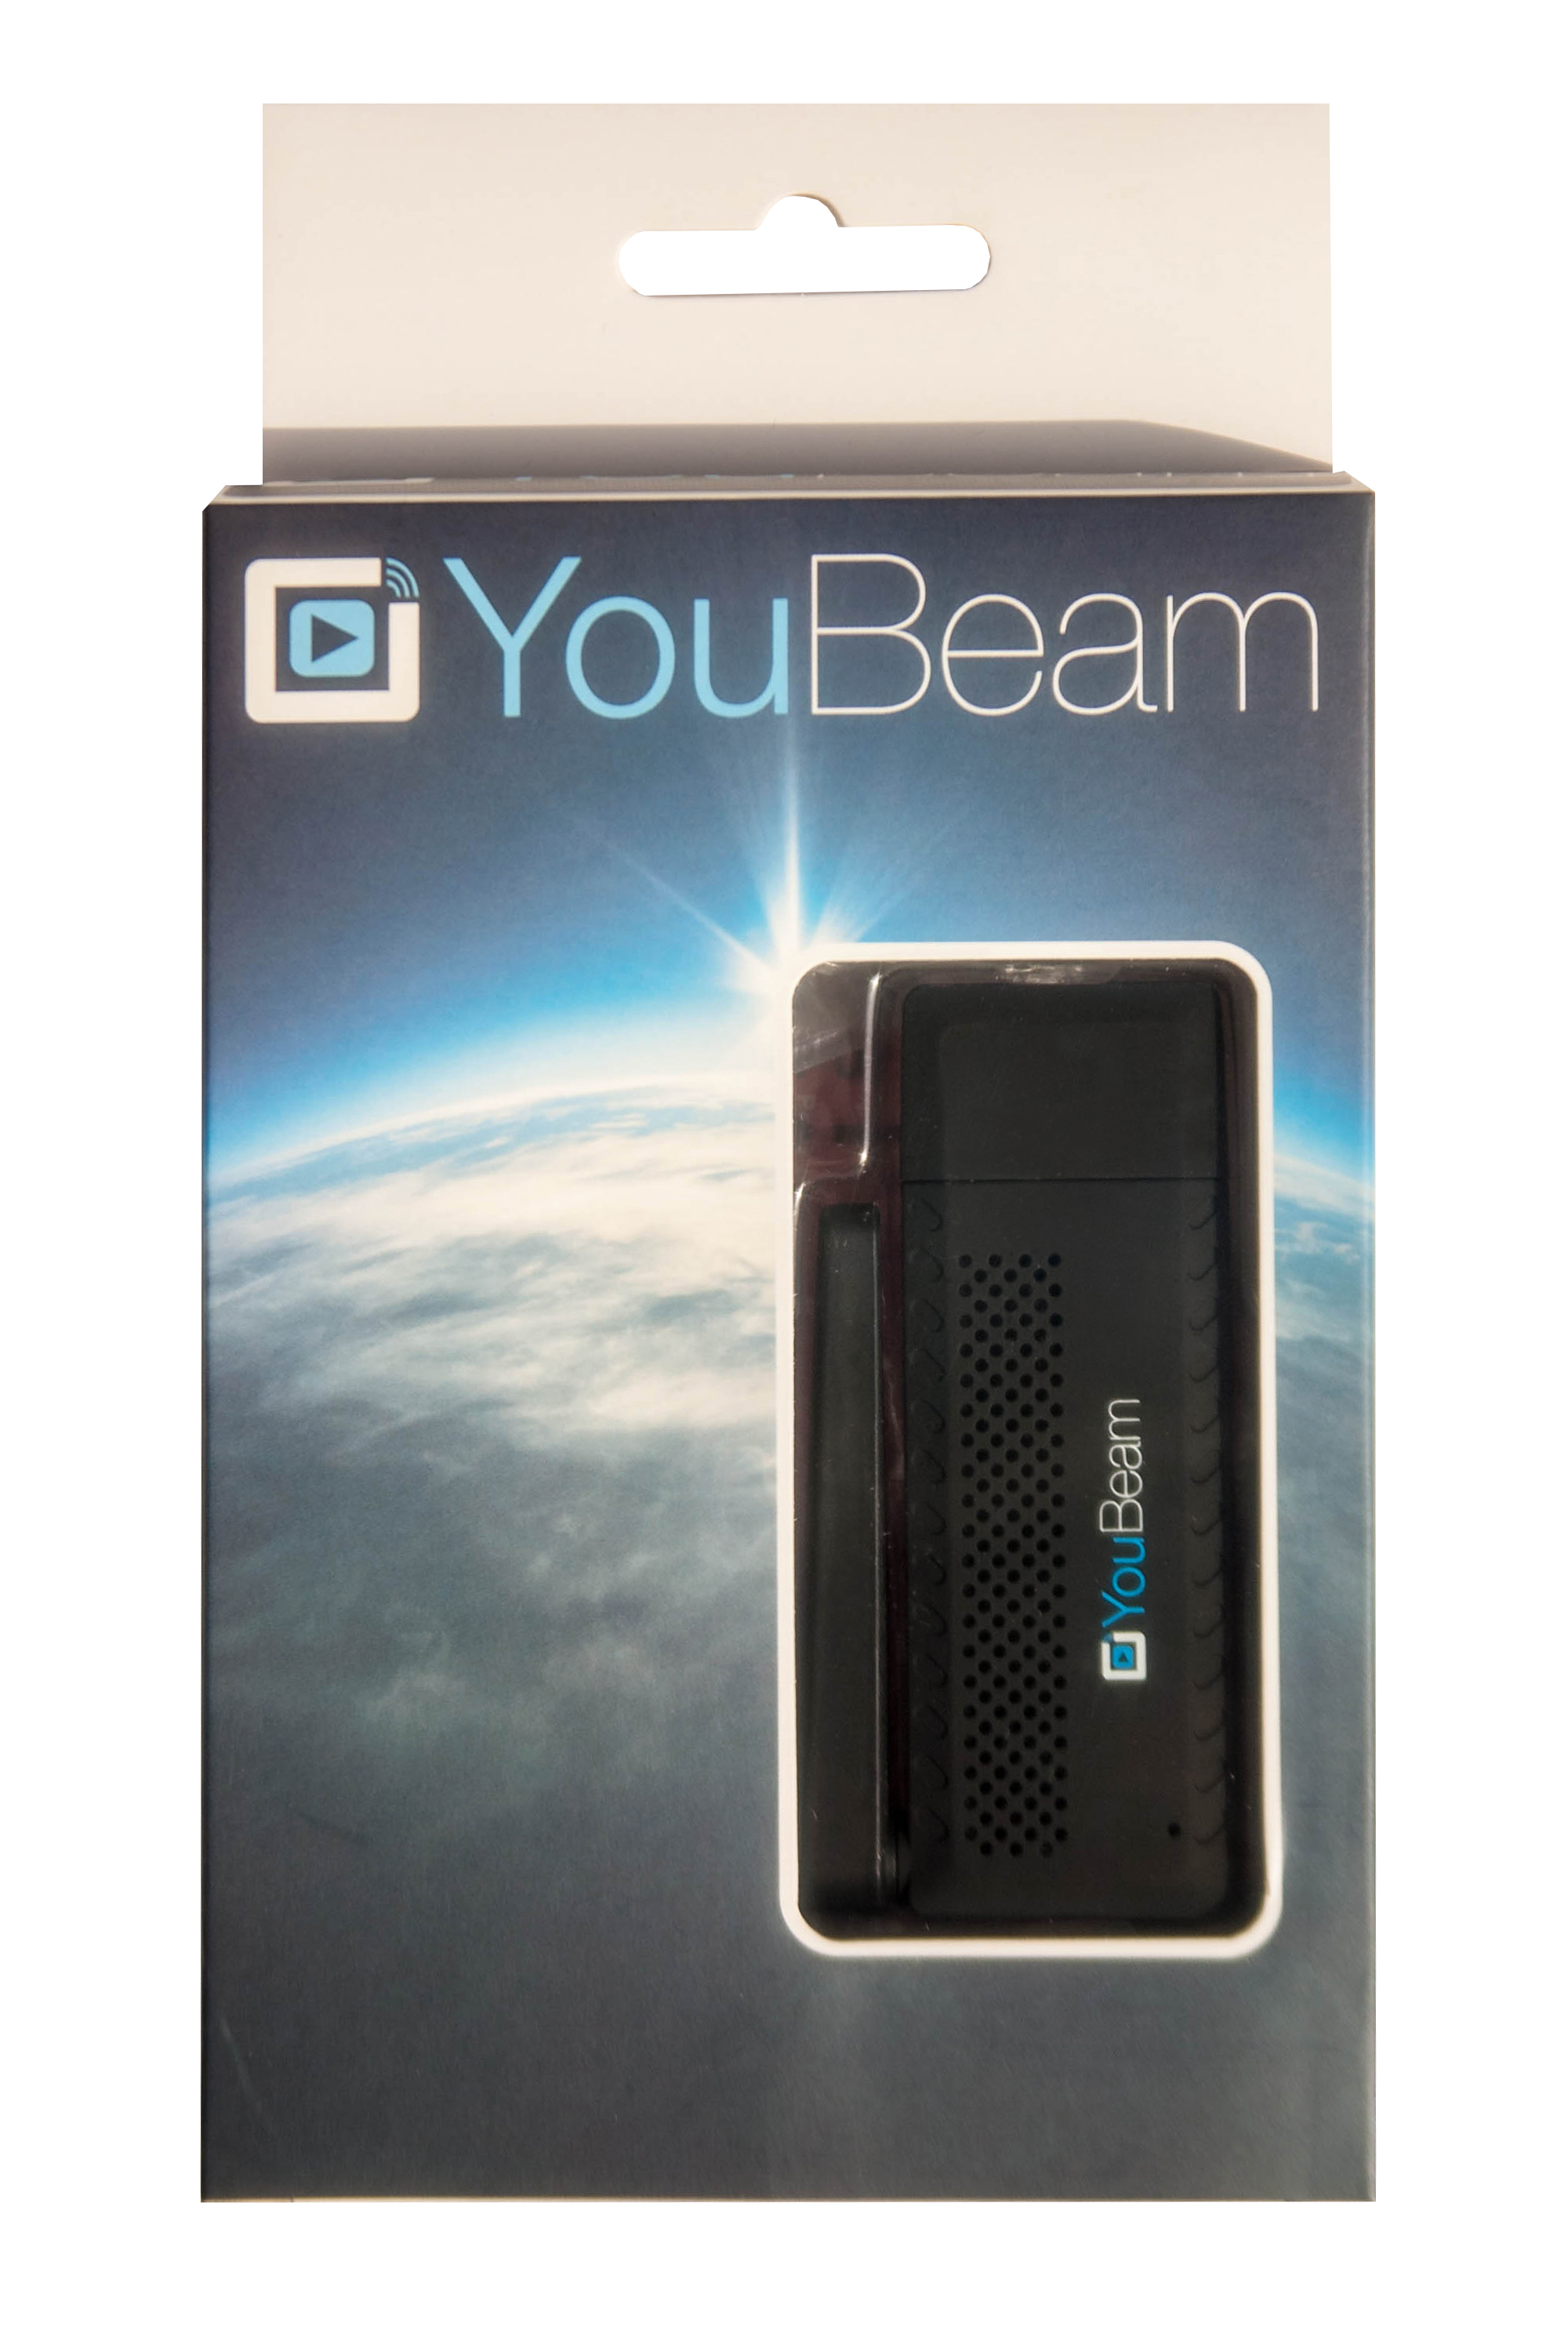 YouBeam is comprised of two products which work together to help users search for Web content and then watch it directly on their TV.